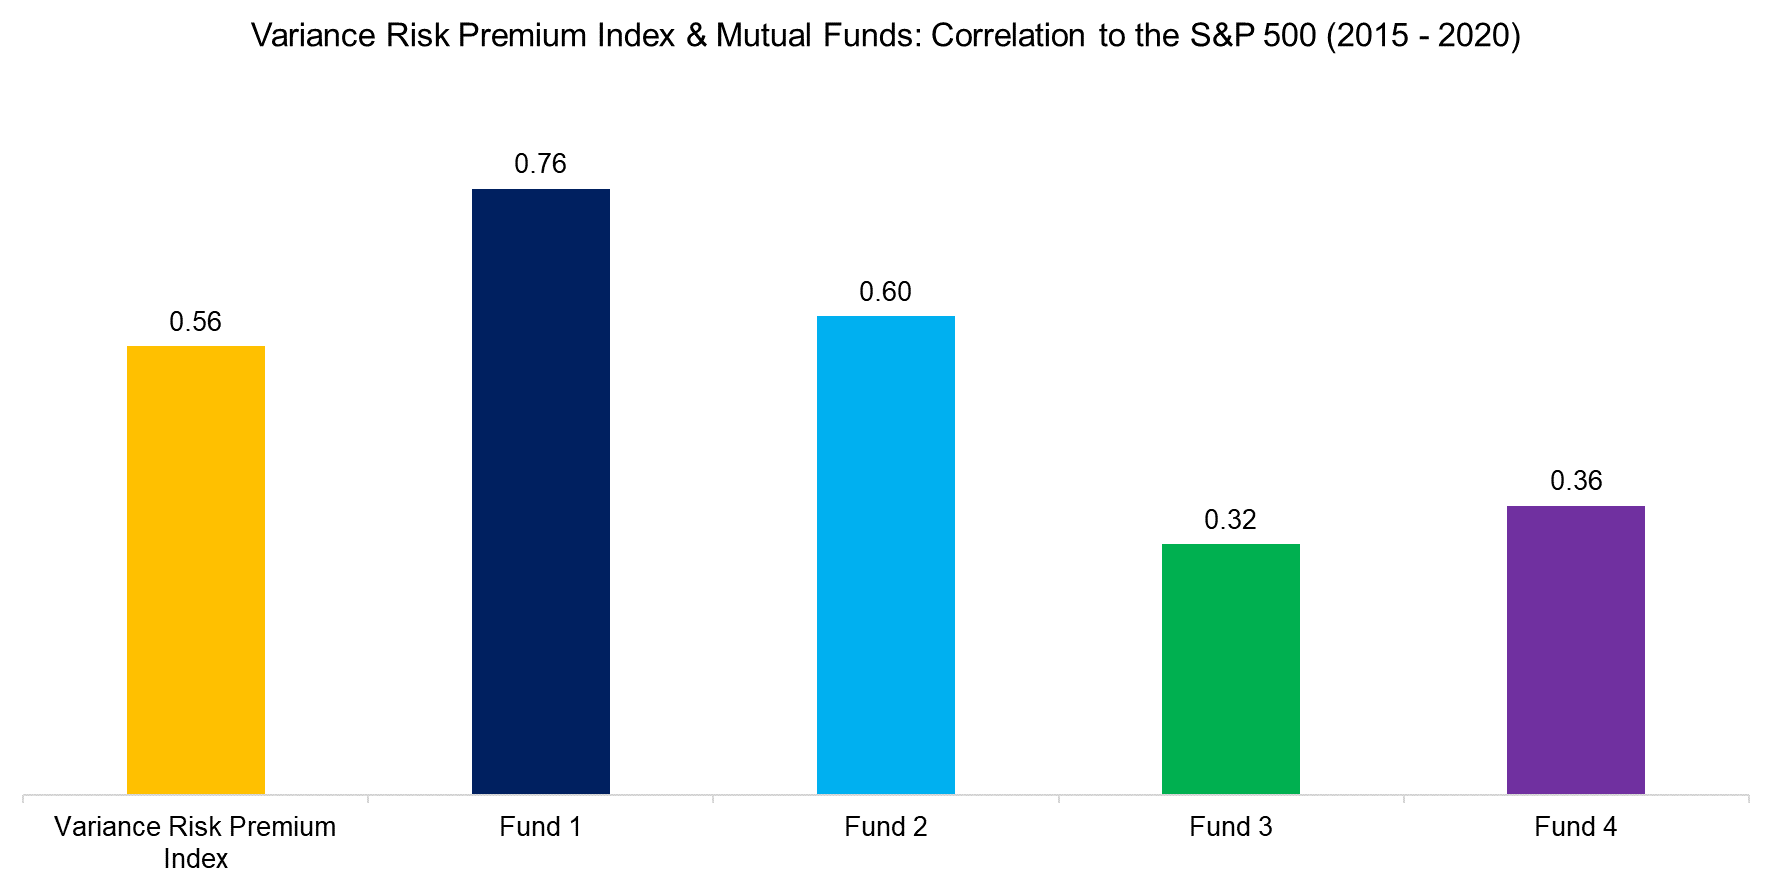 Variance Risk Premium Index & Mutual Funds Correlation to the S&P 500 (2015 - 2020)